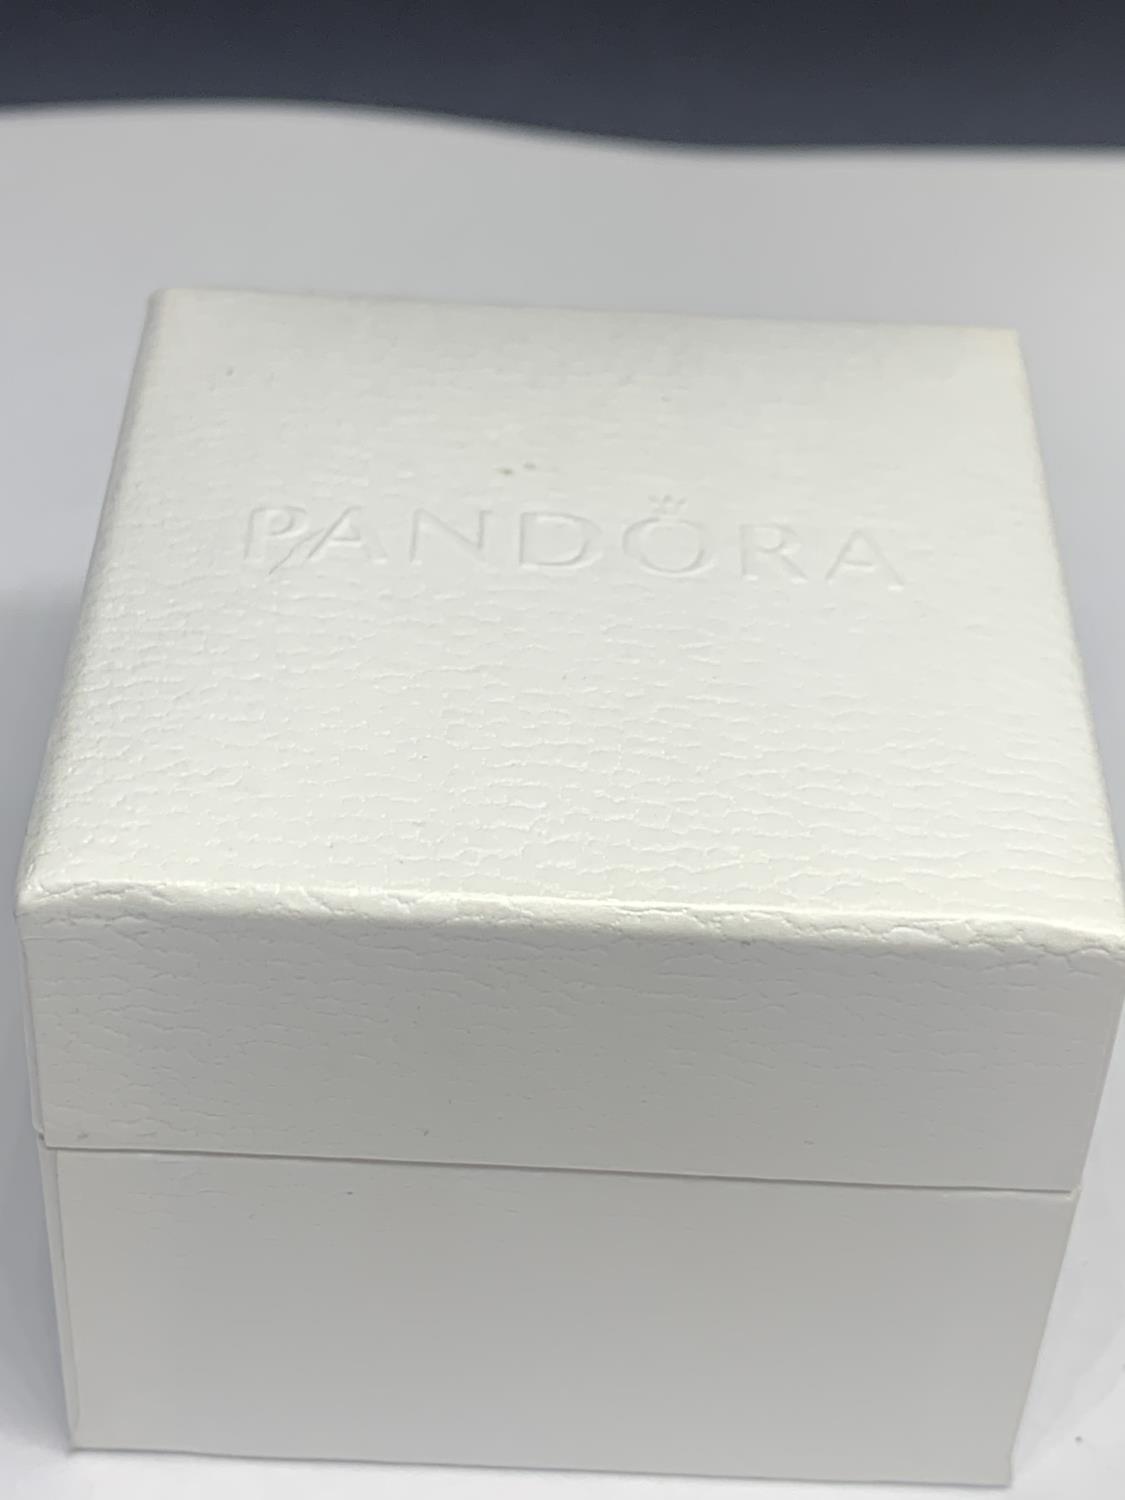 A PANDORA FLOWER RING SIZE N AND A PAIR OF MATCHING EARRINGS IN A PRESENTATION BOX - Image 3 of 3